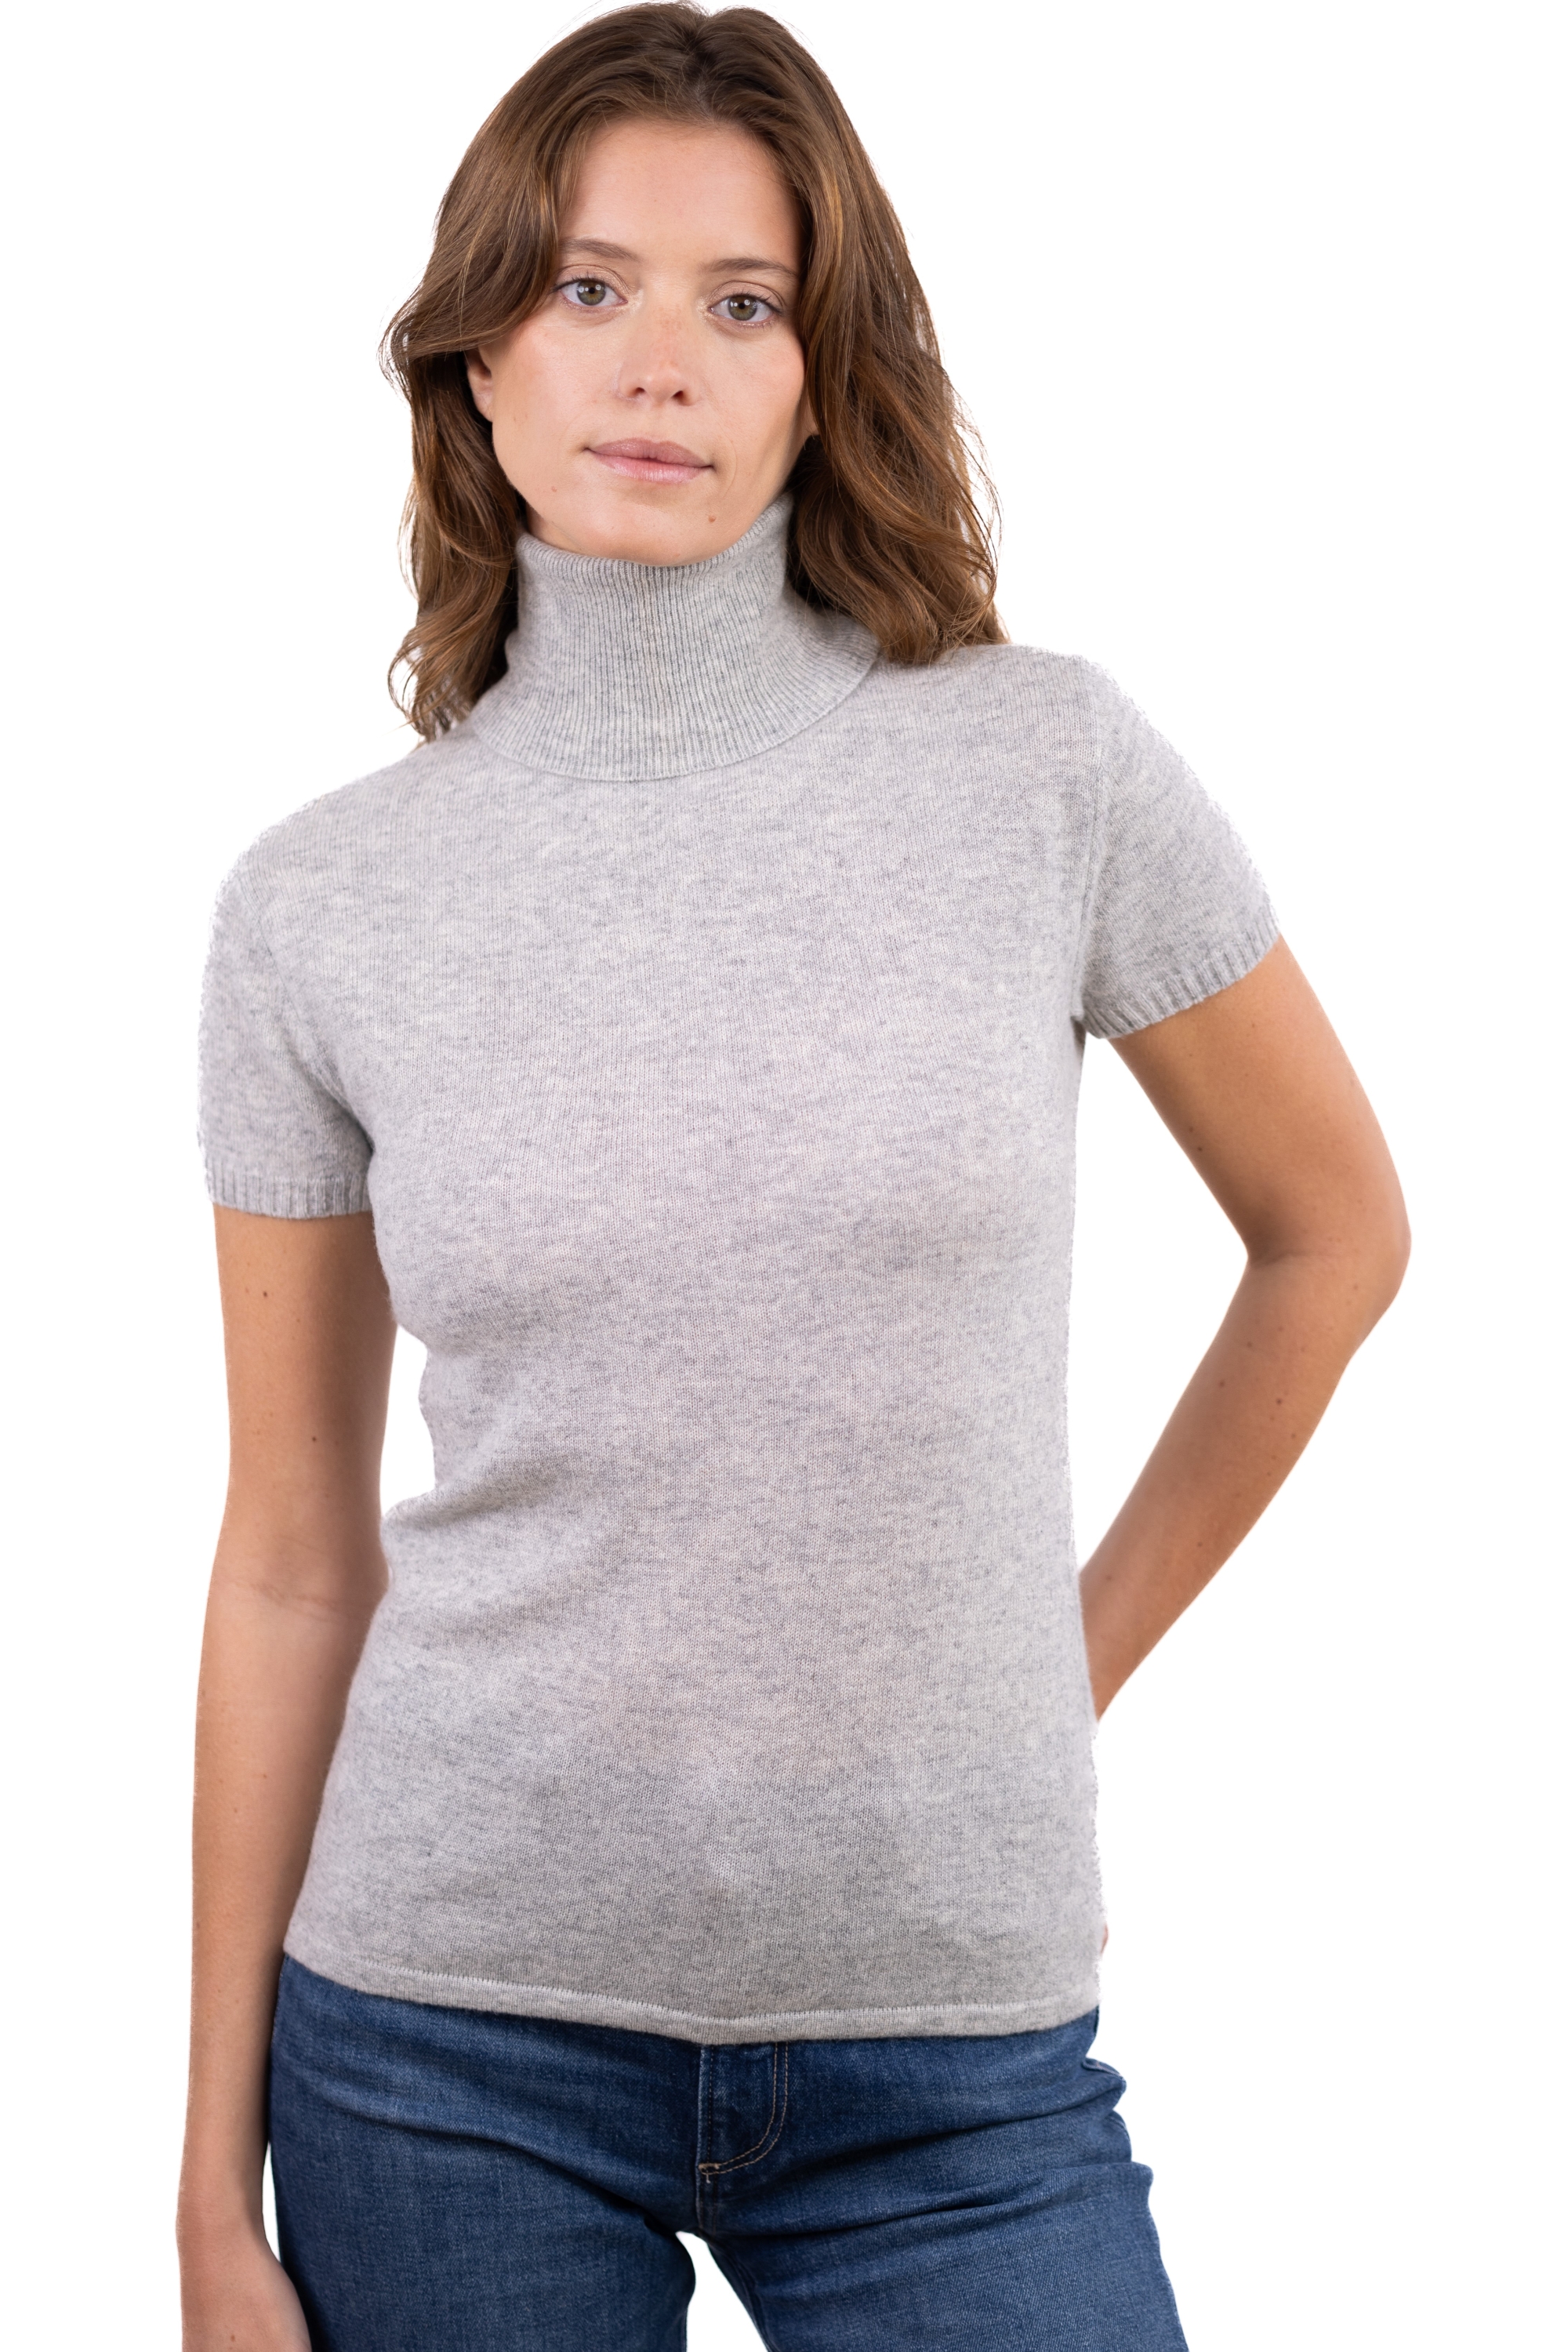 Cashmere ladies spring summer collection olivia flanelle chine s